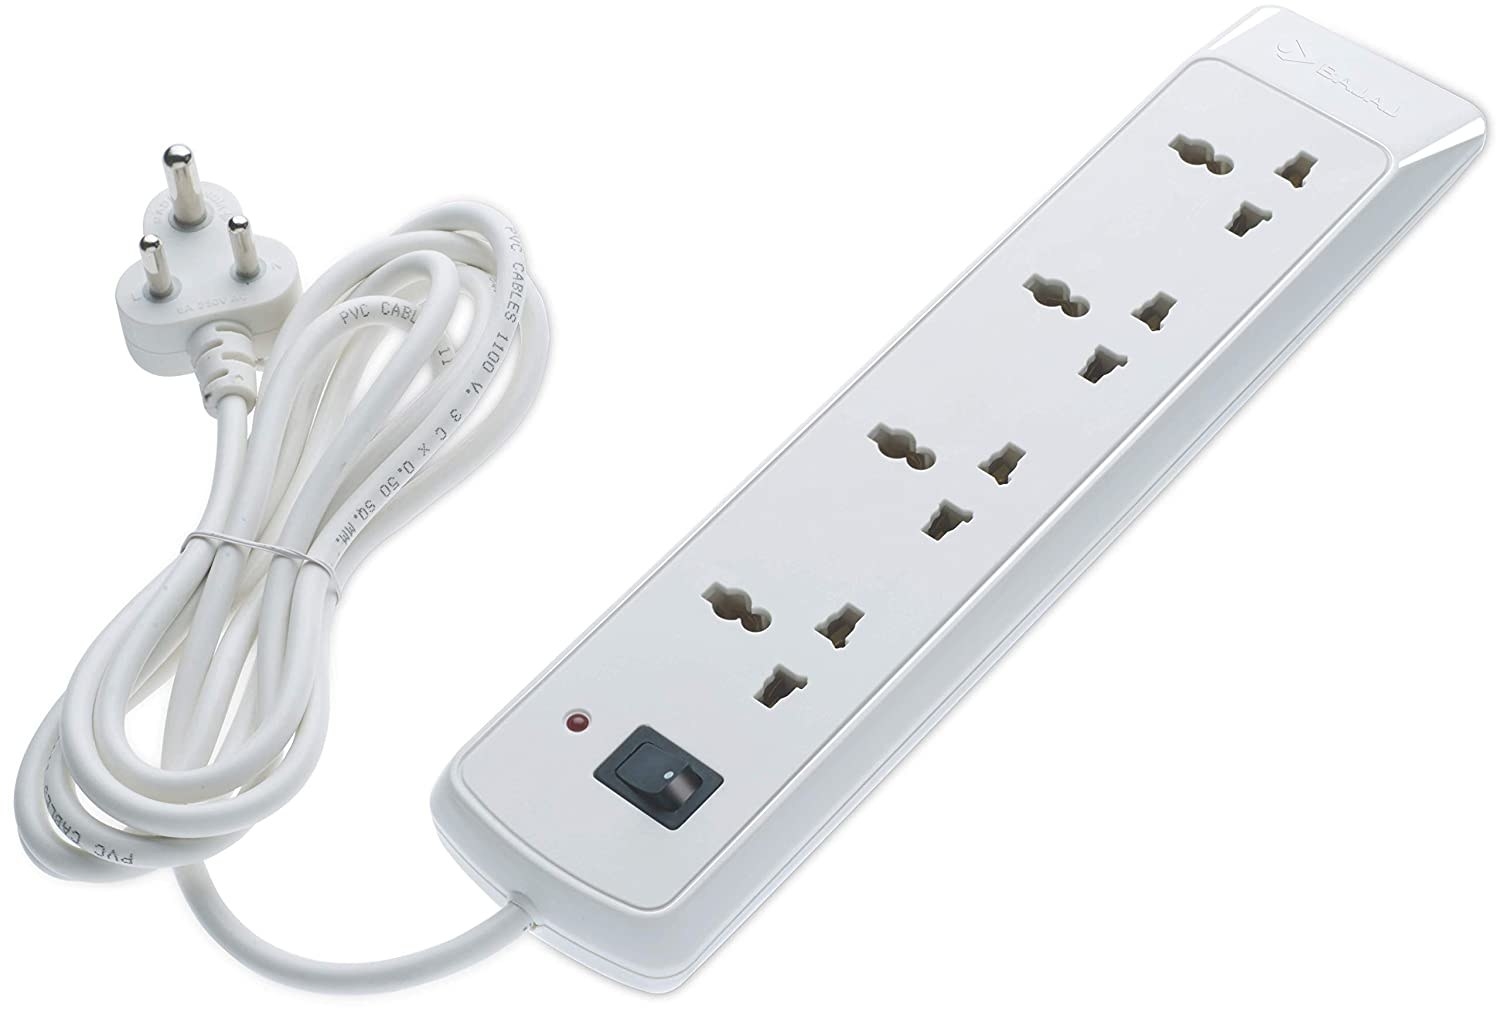 13 Gadgets You Definitely Need If You Suffer From Frequent Power Cuts